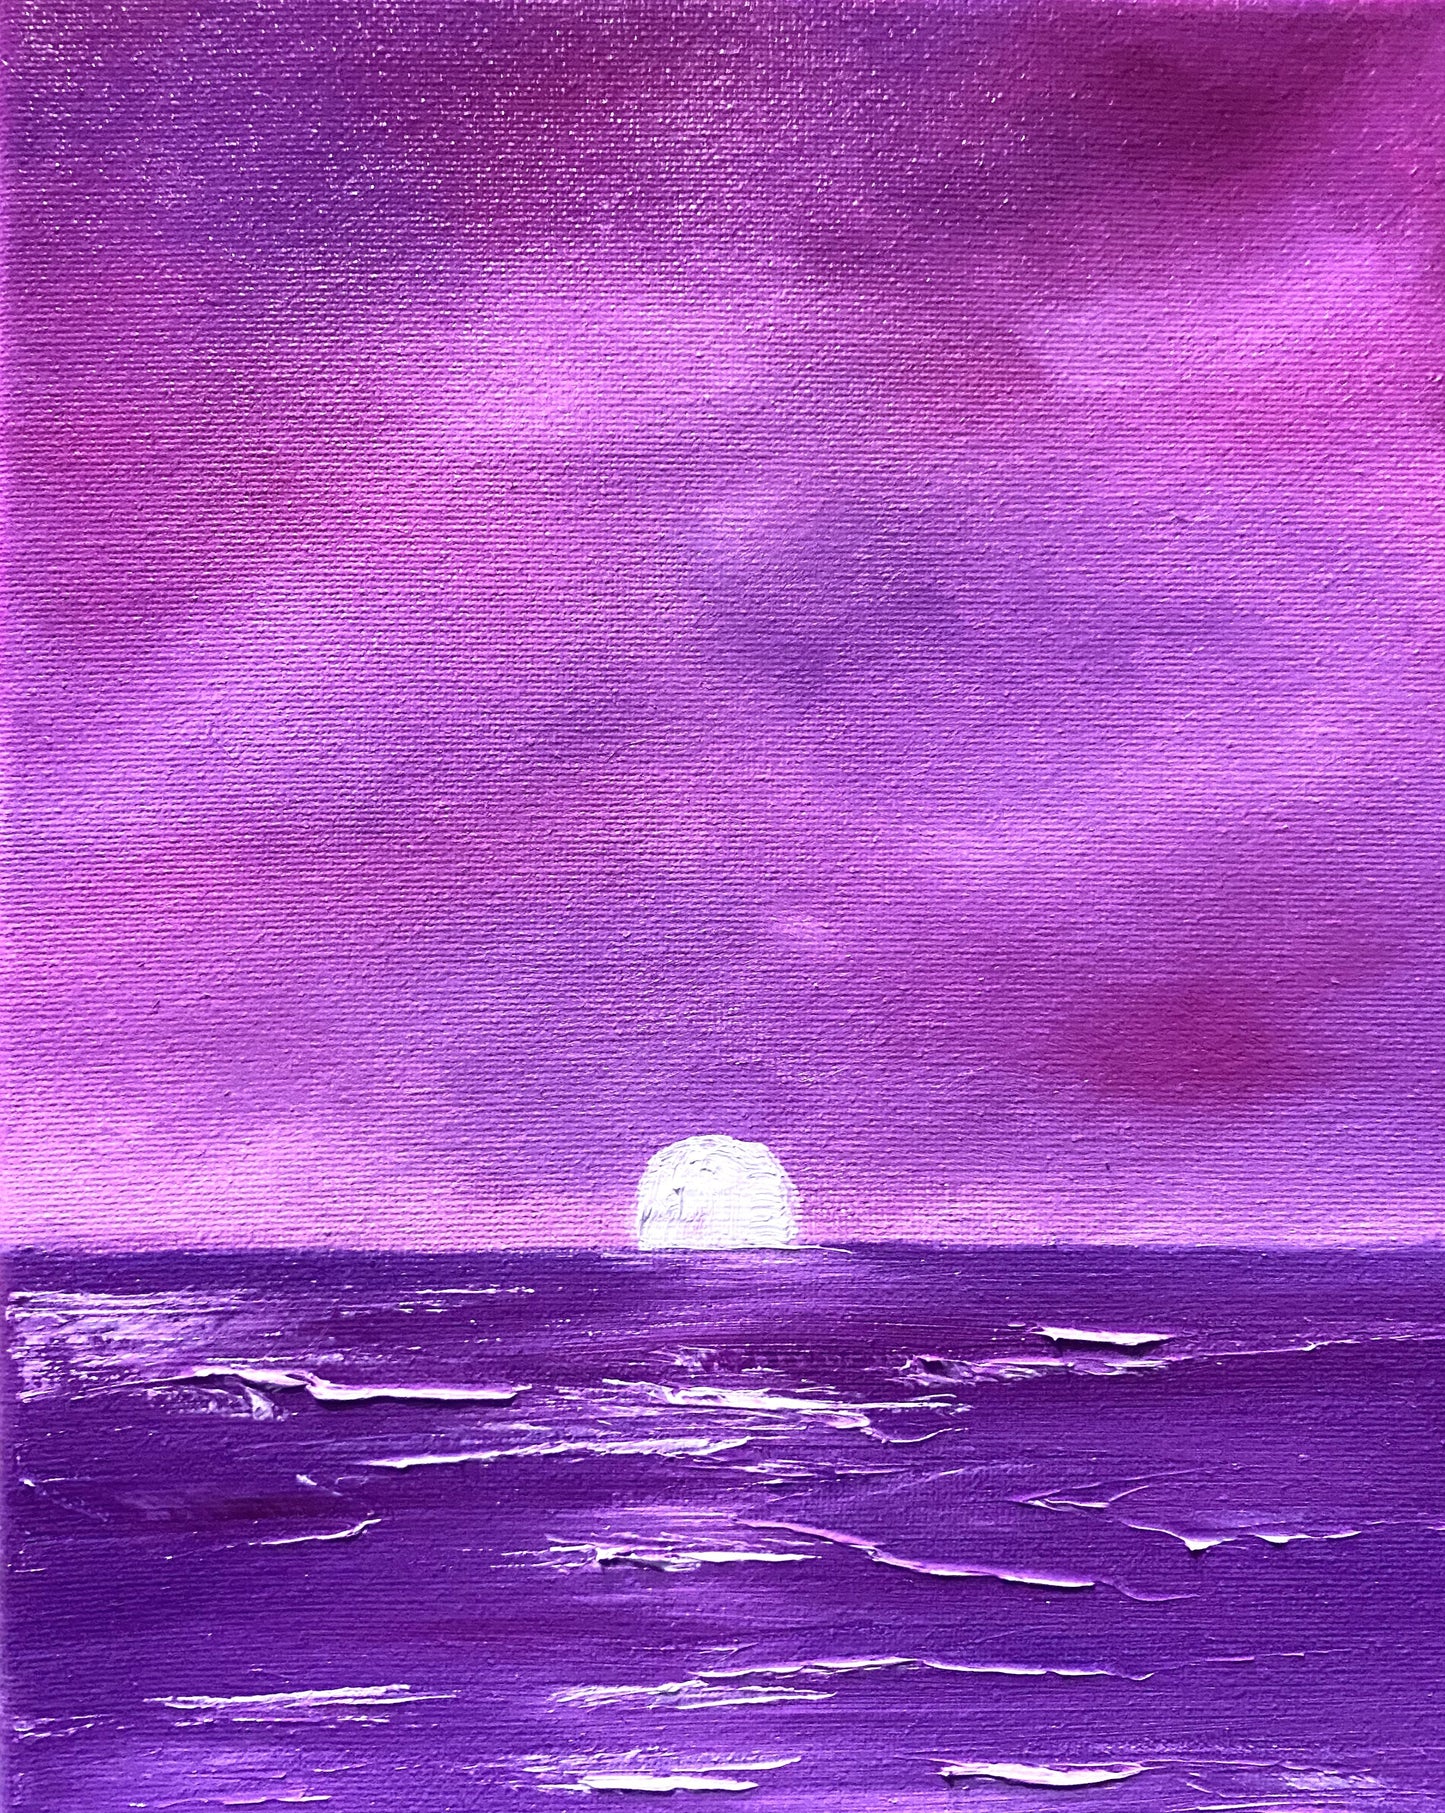 Fantasy seascape art at sunset in pink and purple